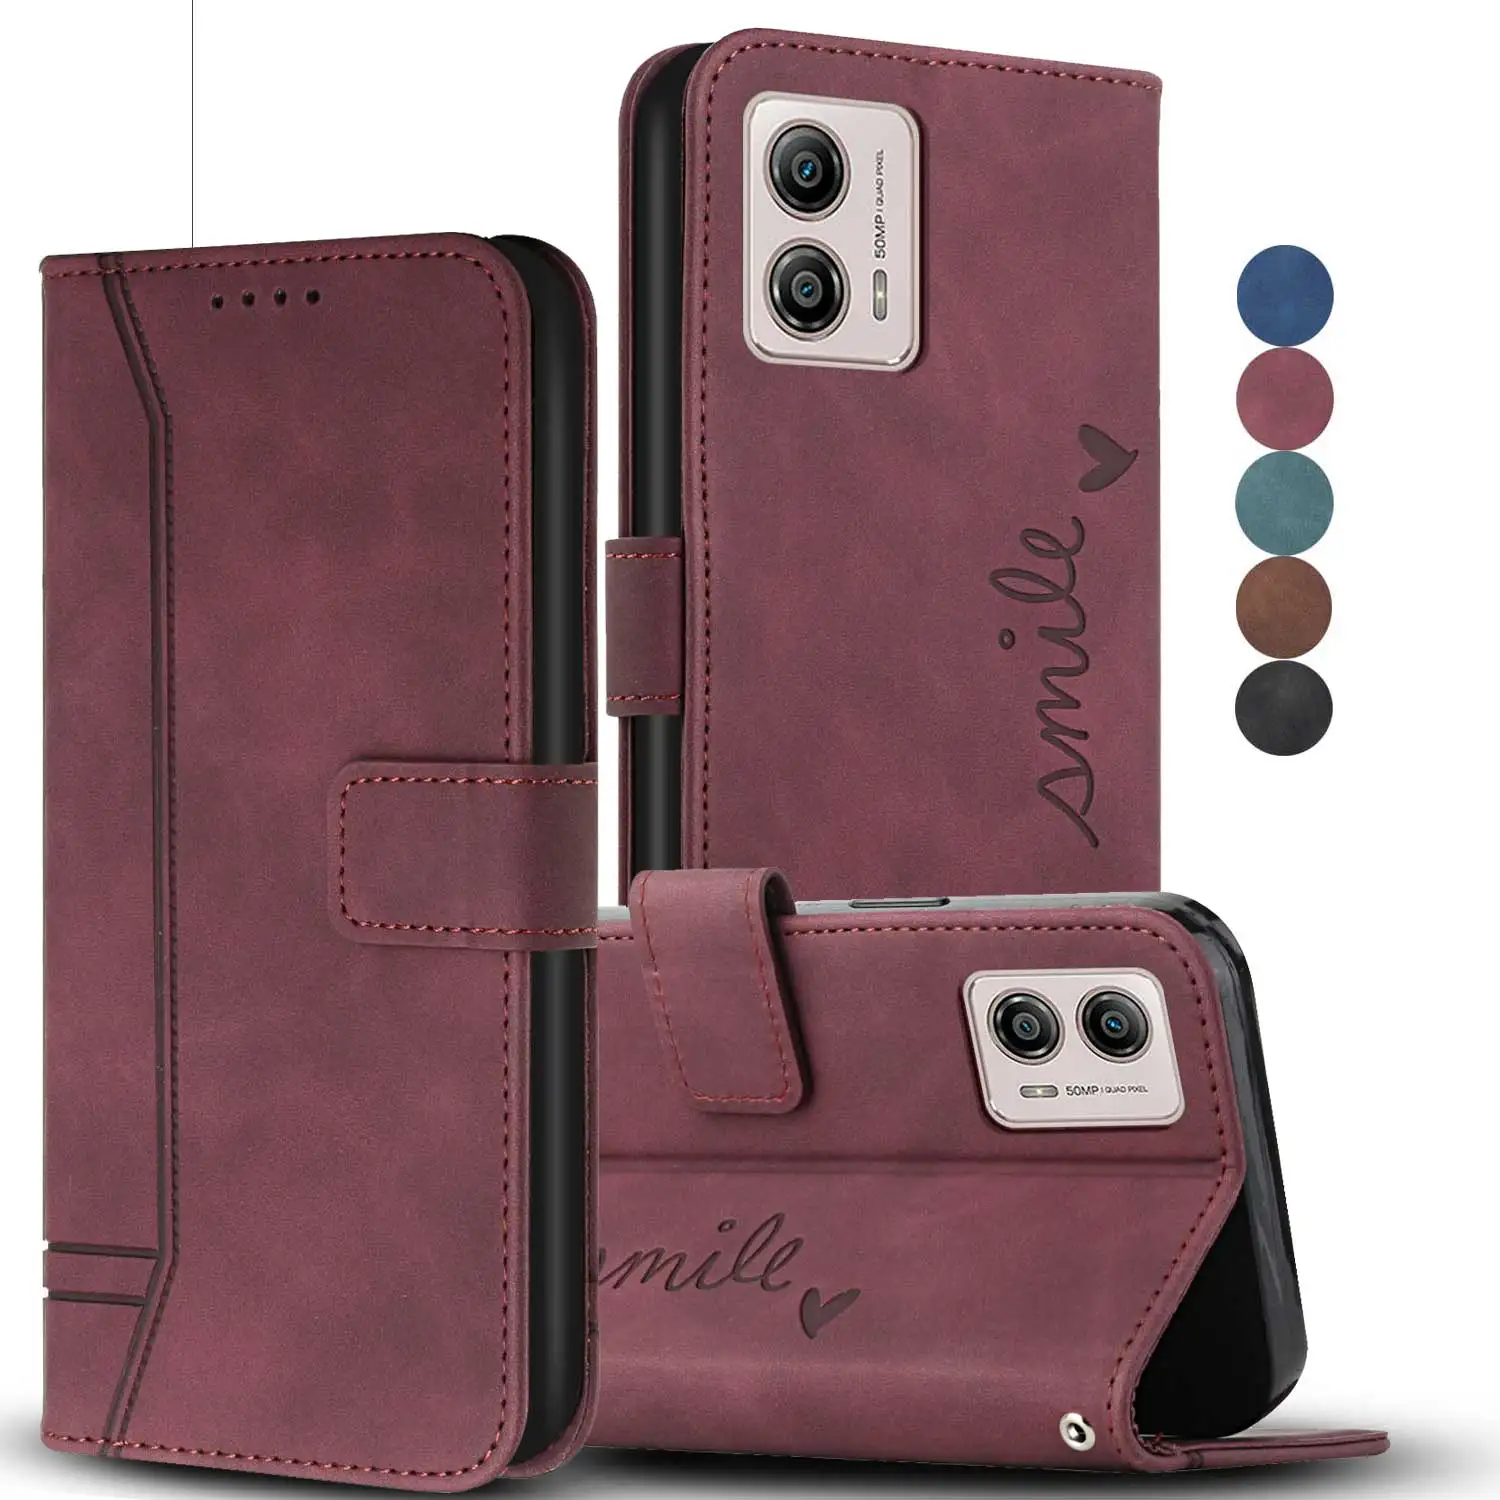 

Leather Case for Oppo Realme 9 10 Pro Plus 5g 4G C35 C31 C30 V25 9i C21y C12 C15 C25 C25s 8 Pro 7i C17 V5 Narzo 20 30 30A CASE